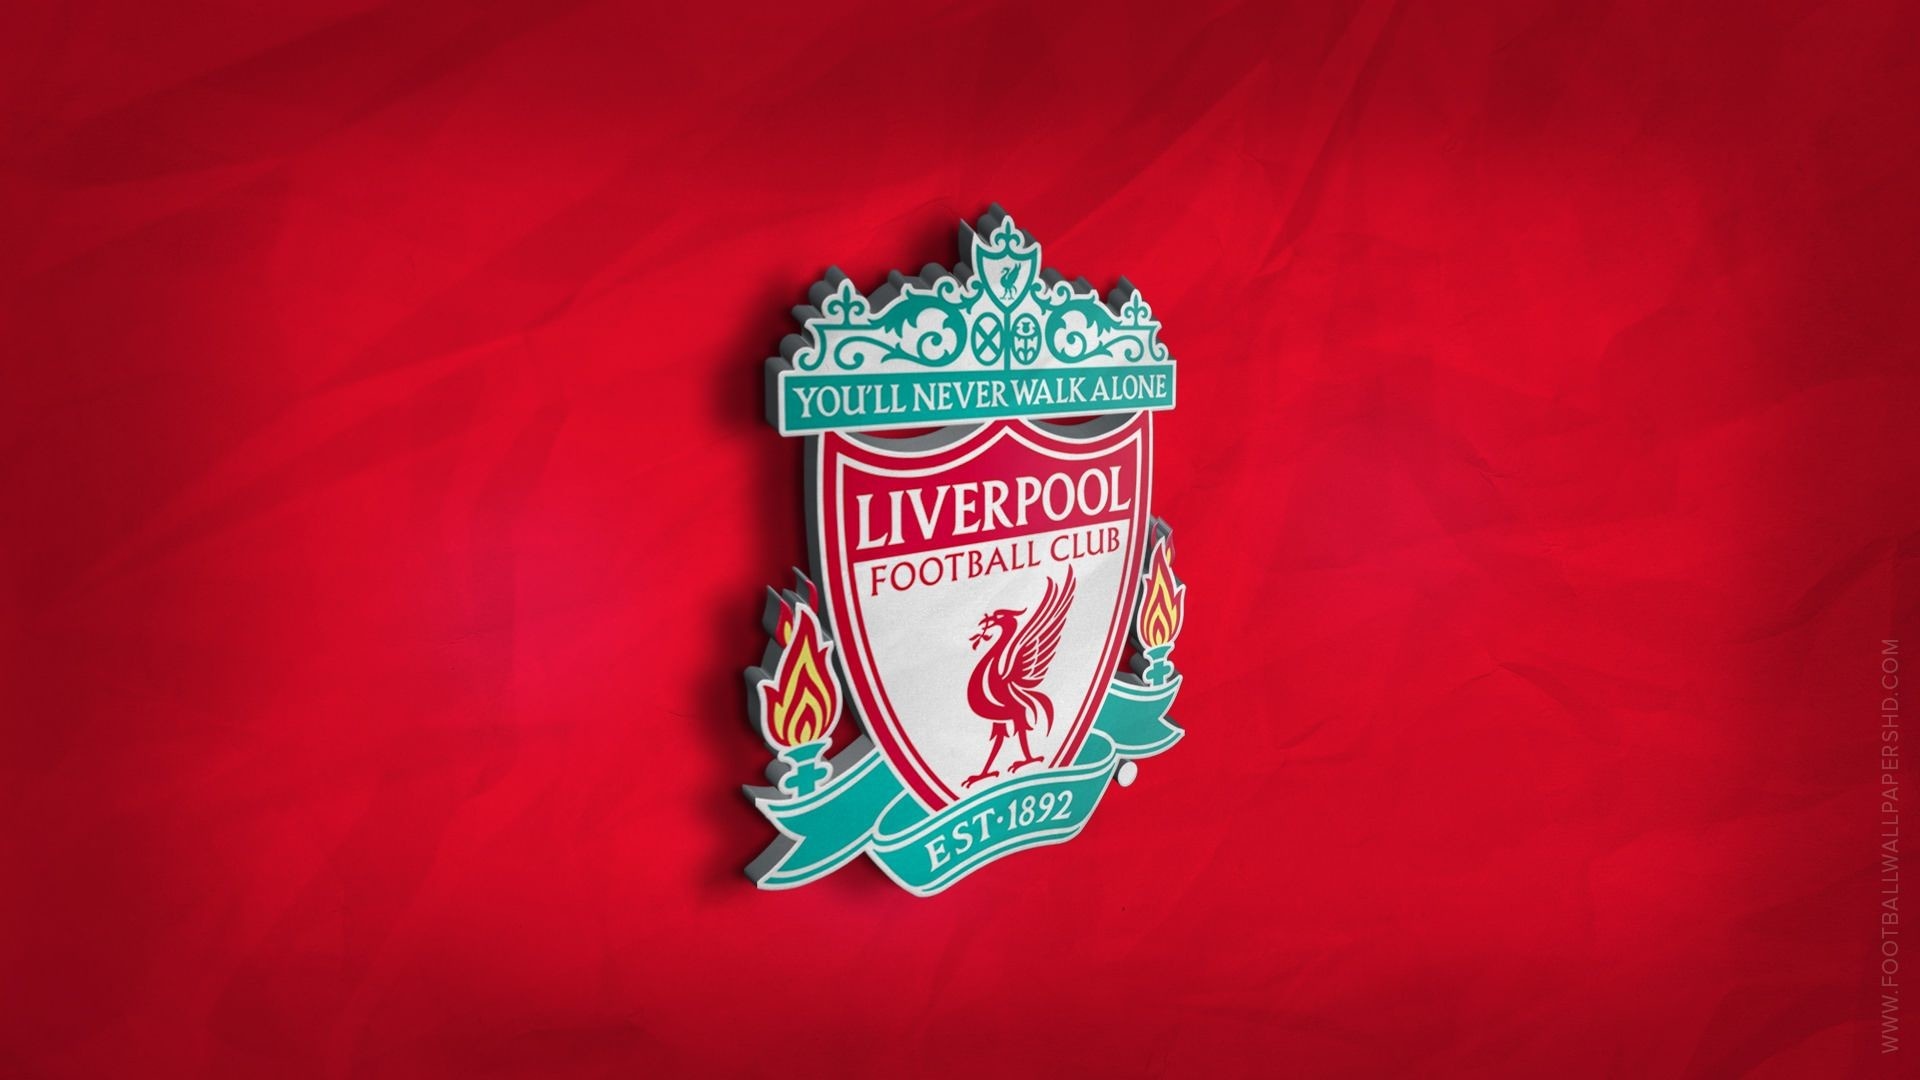 Liverpool Football Club: EPL, The club's anthem is “You'll Never Walk Alone”. 1920x1080 Full HD Wallpaper.